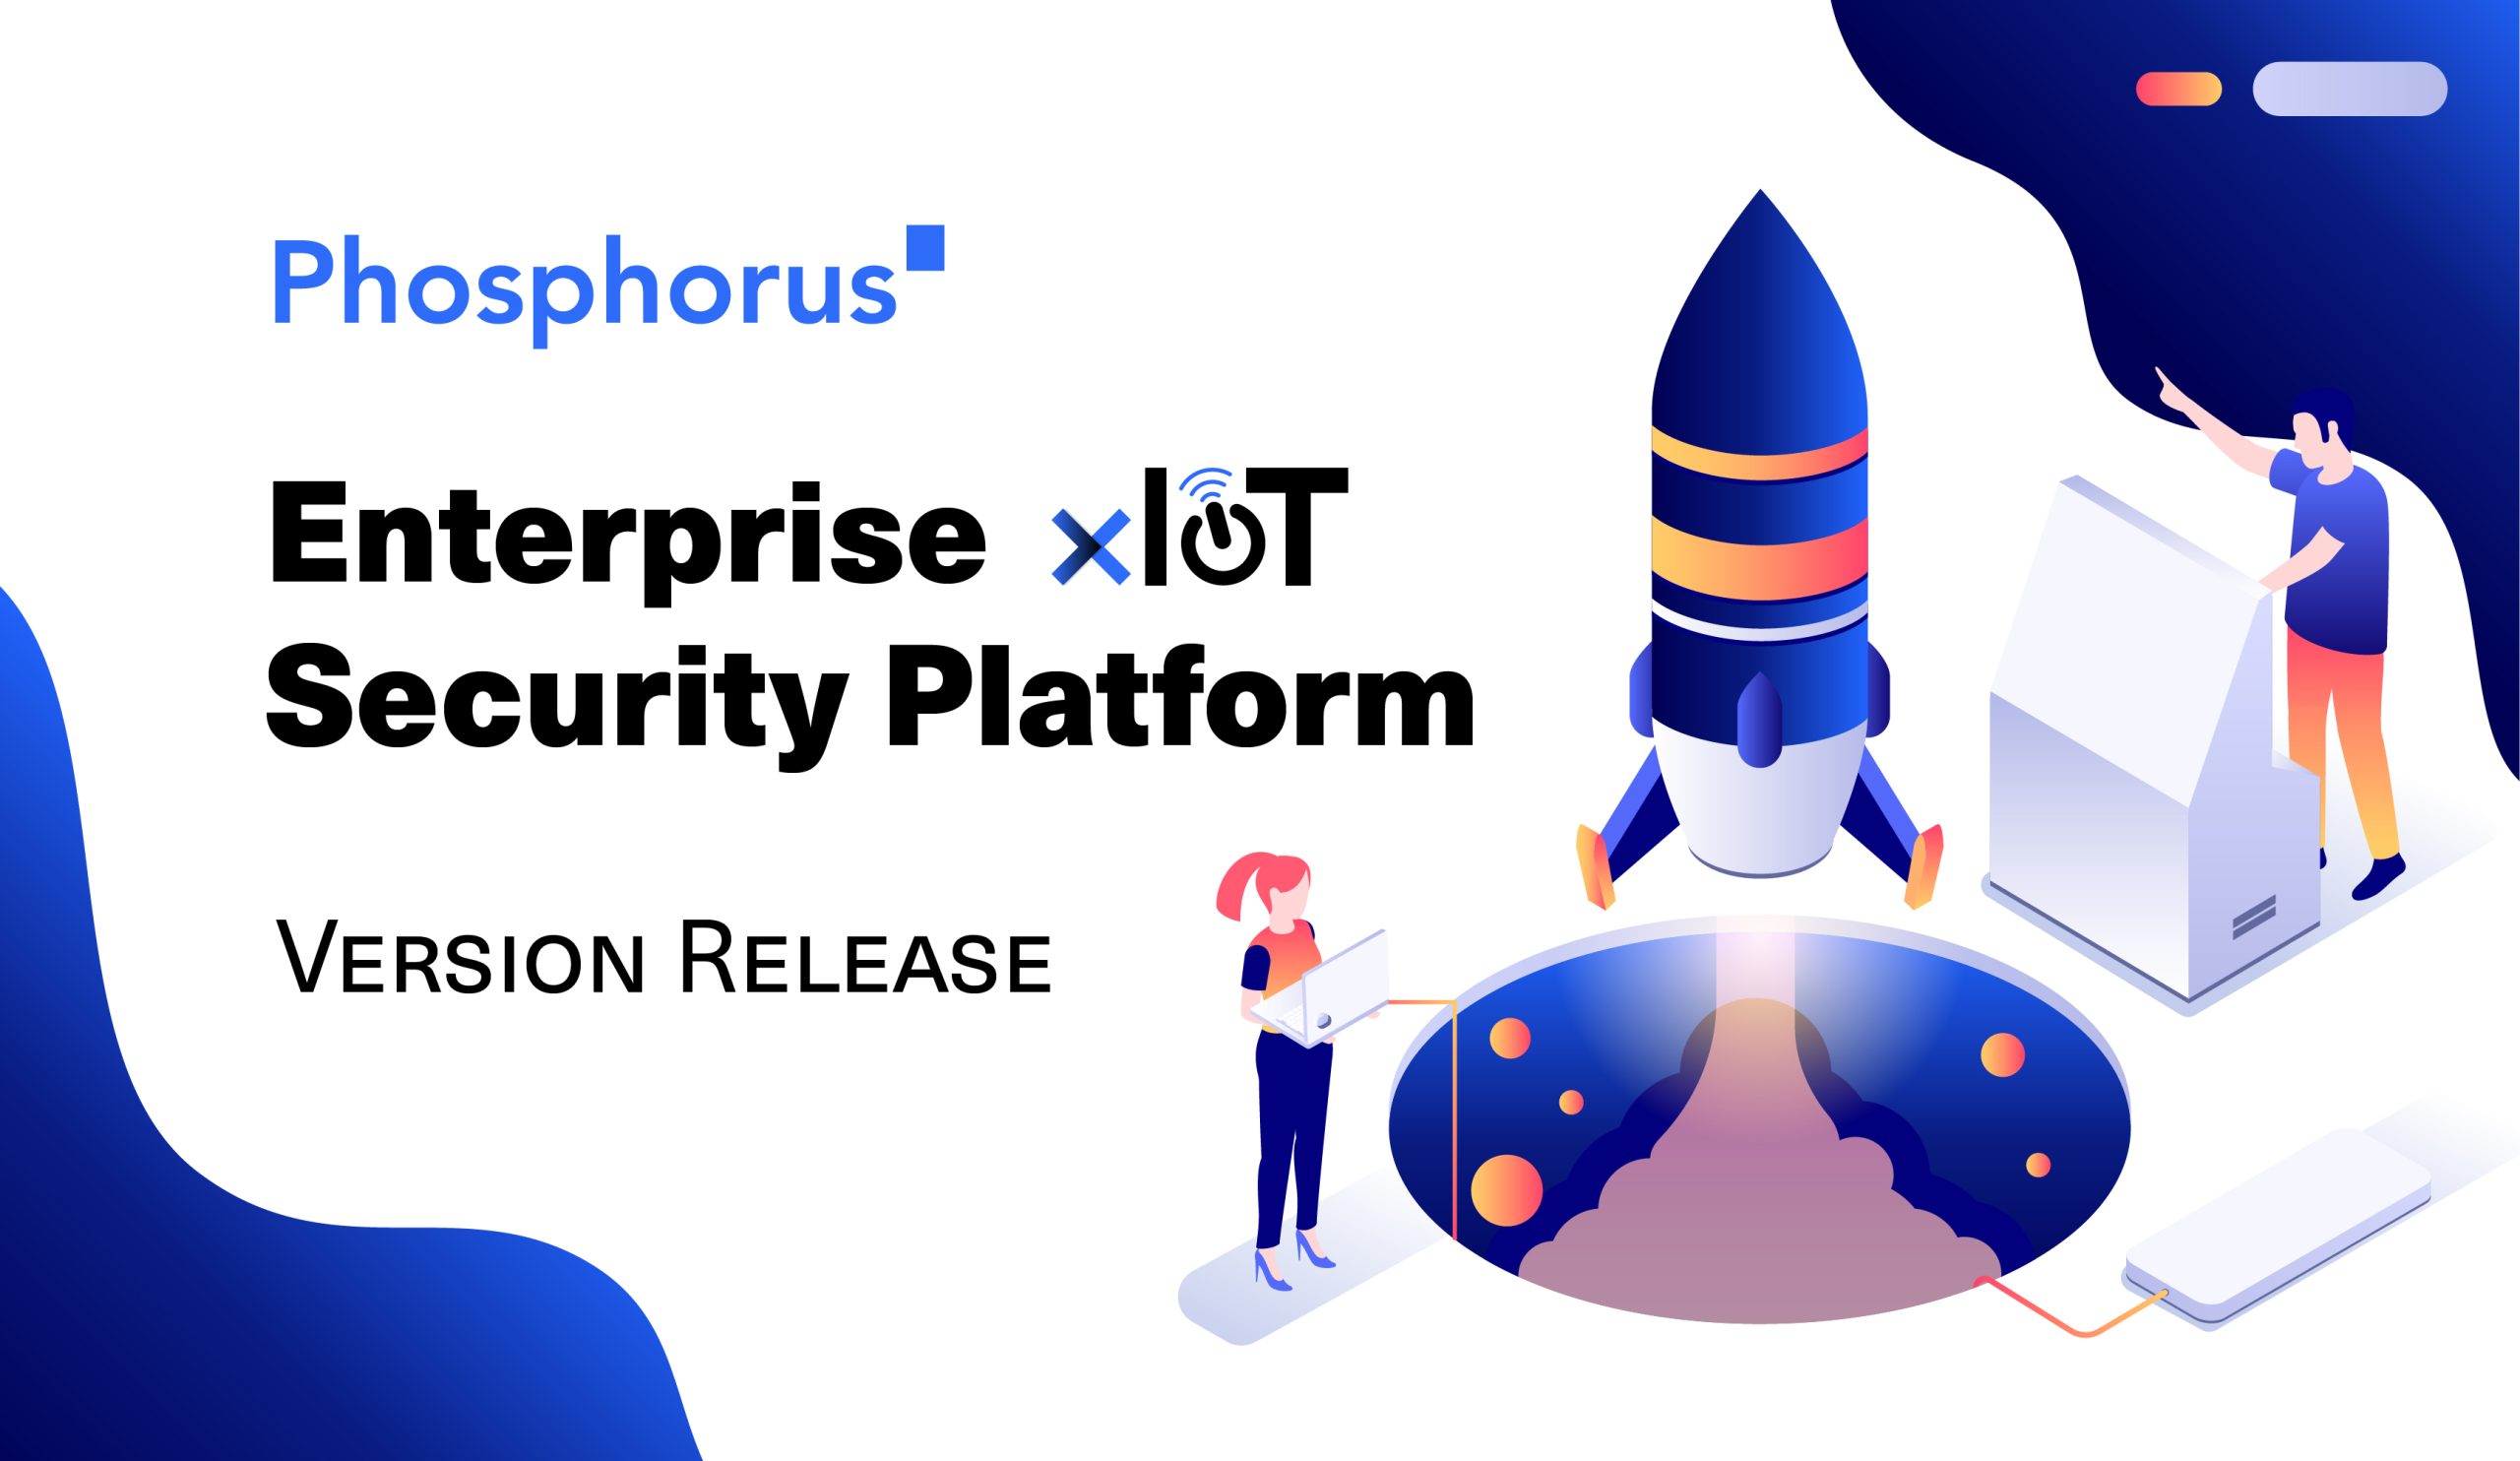 Phosphorus Expands xIoT Security Platform with New Device Hardening Actions and Configuration Management Capabilities